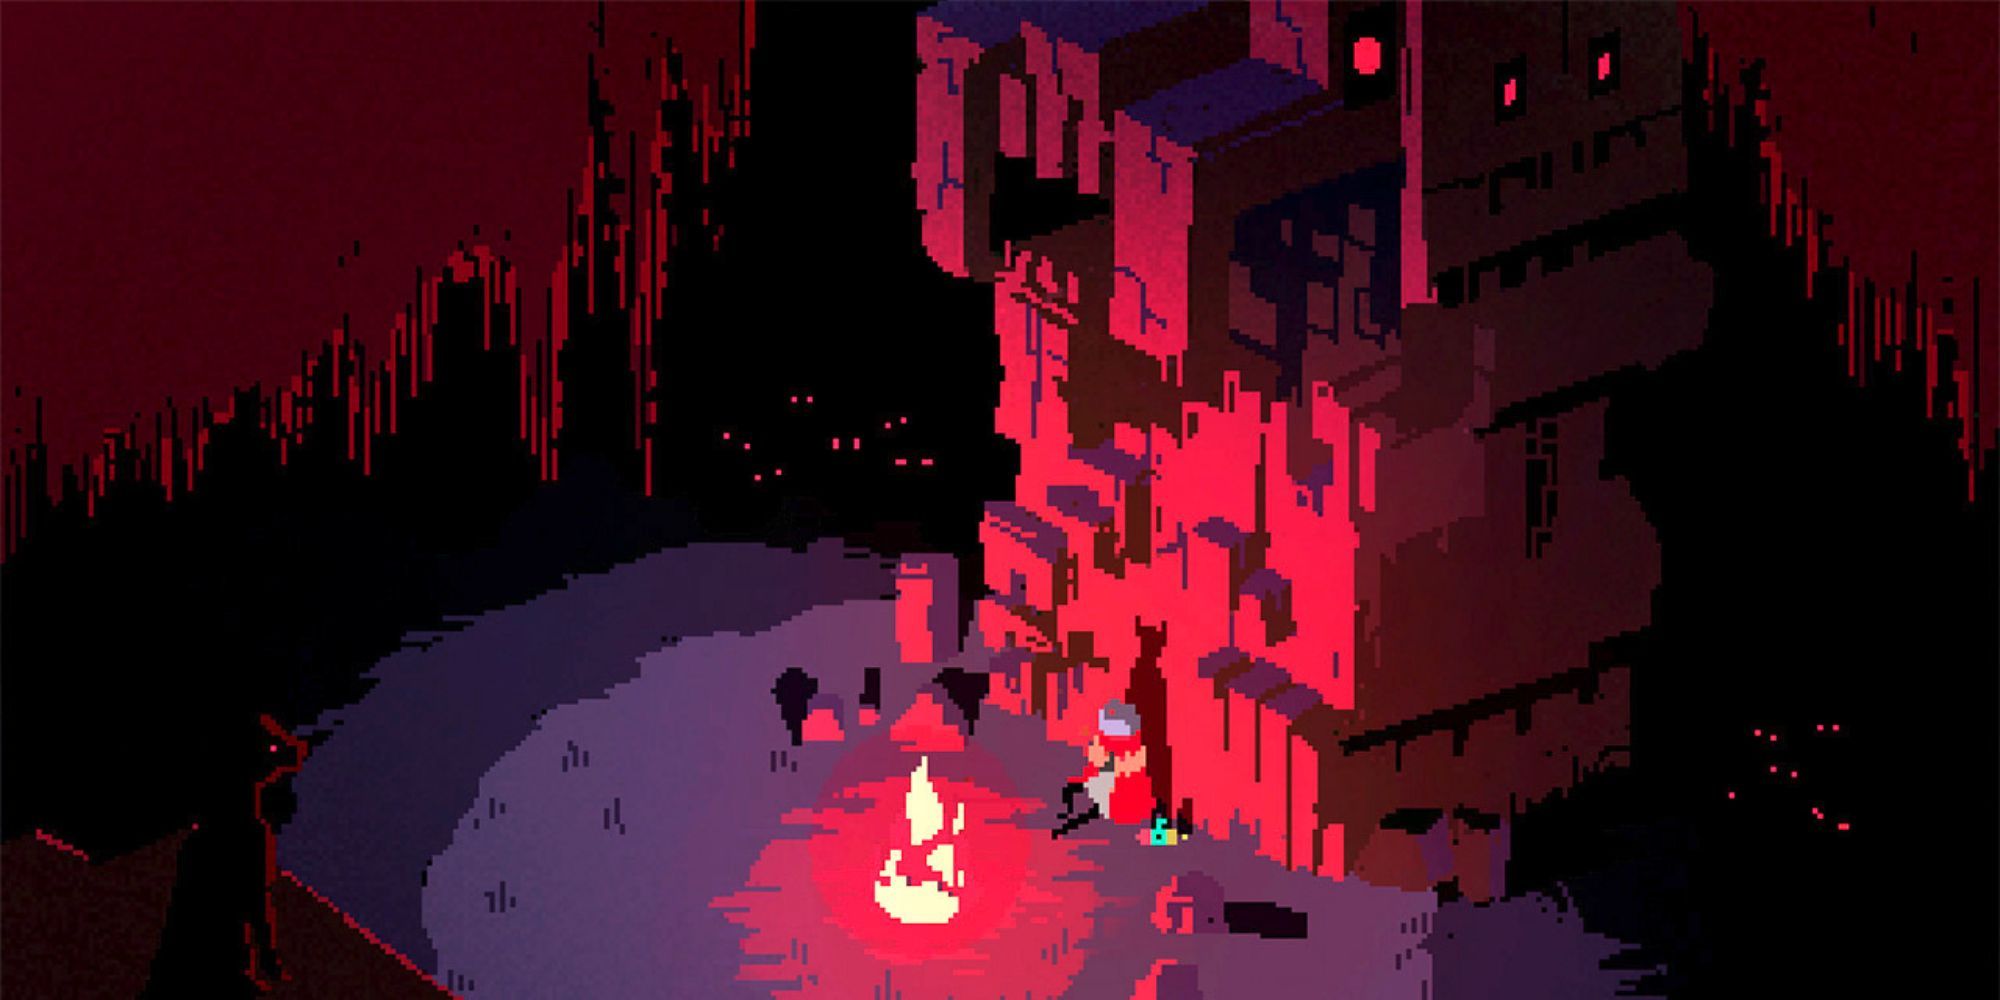 The Drifter sits by a fire in a dark cave-like area, with eyes staring from the darkness